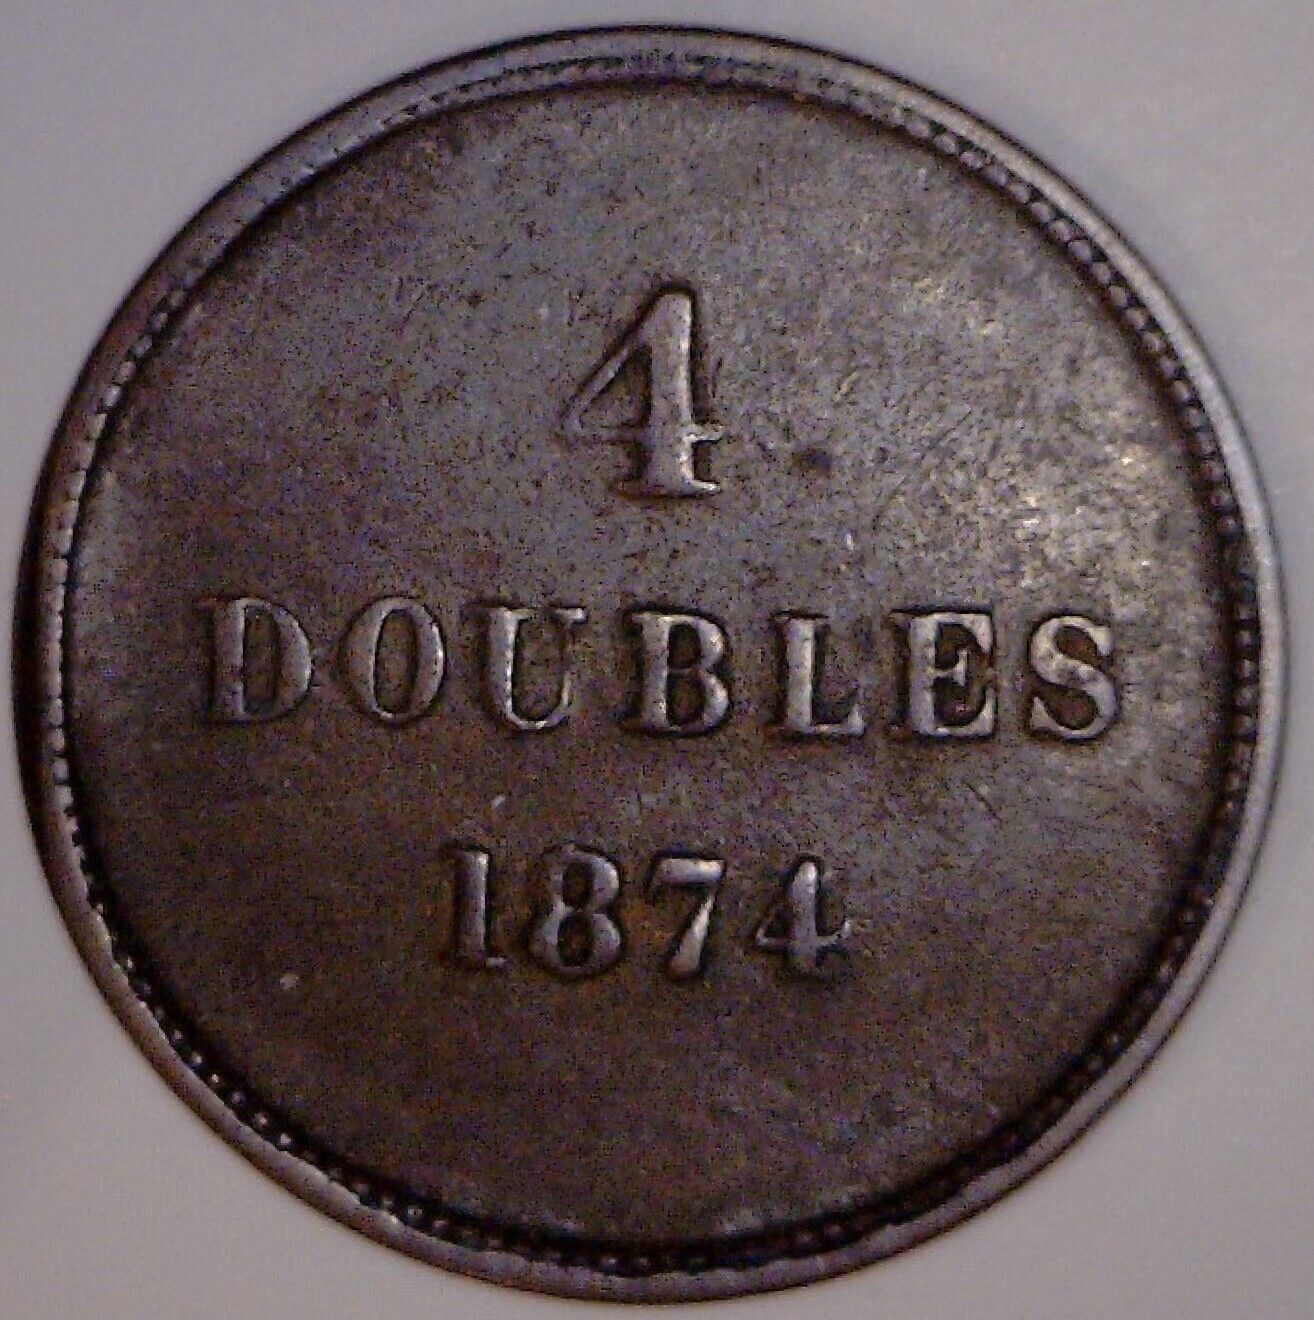  Two Scrace - Isle of Guernsey - 4 Doubles and 8 Doubles coins -1874 and 1868 Без бренда